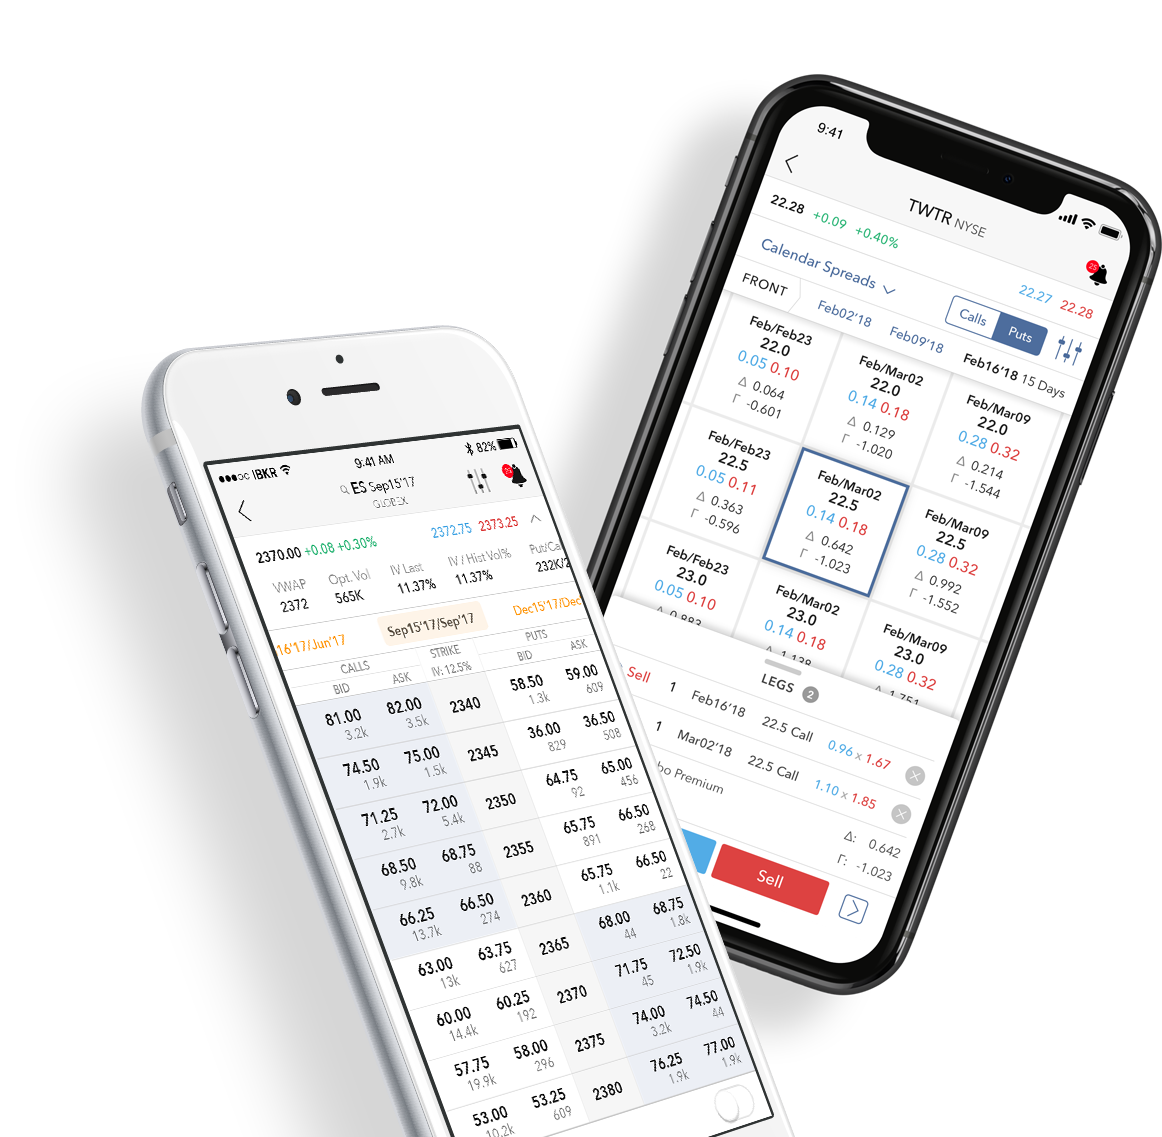 Try our mobile options trading tools today